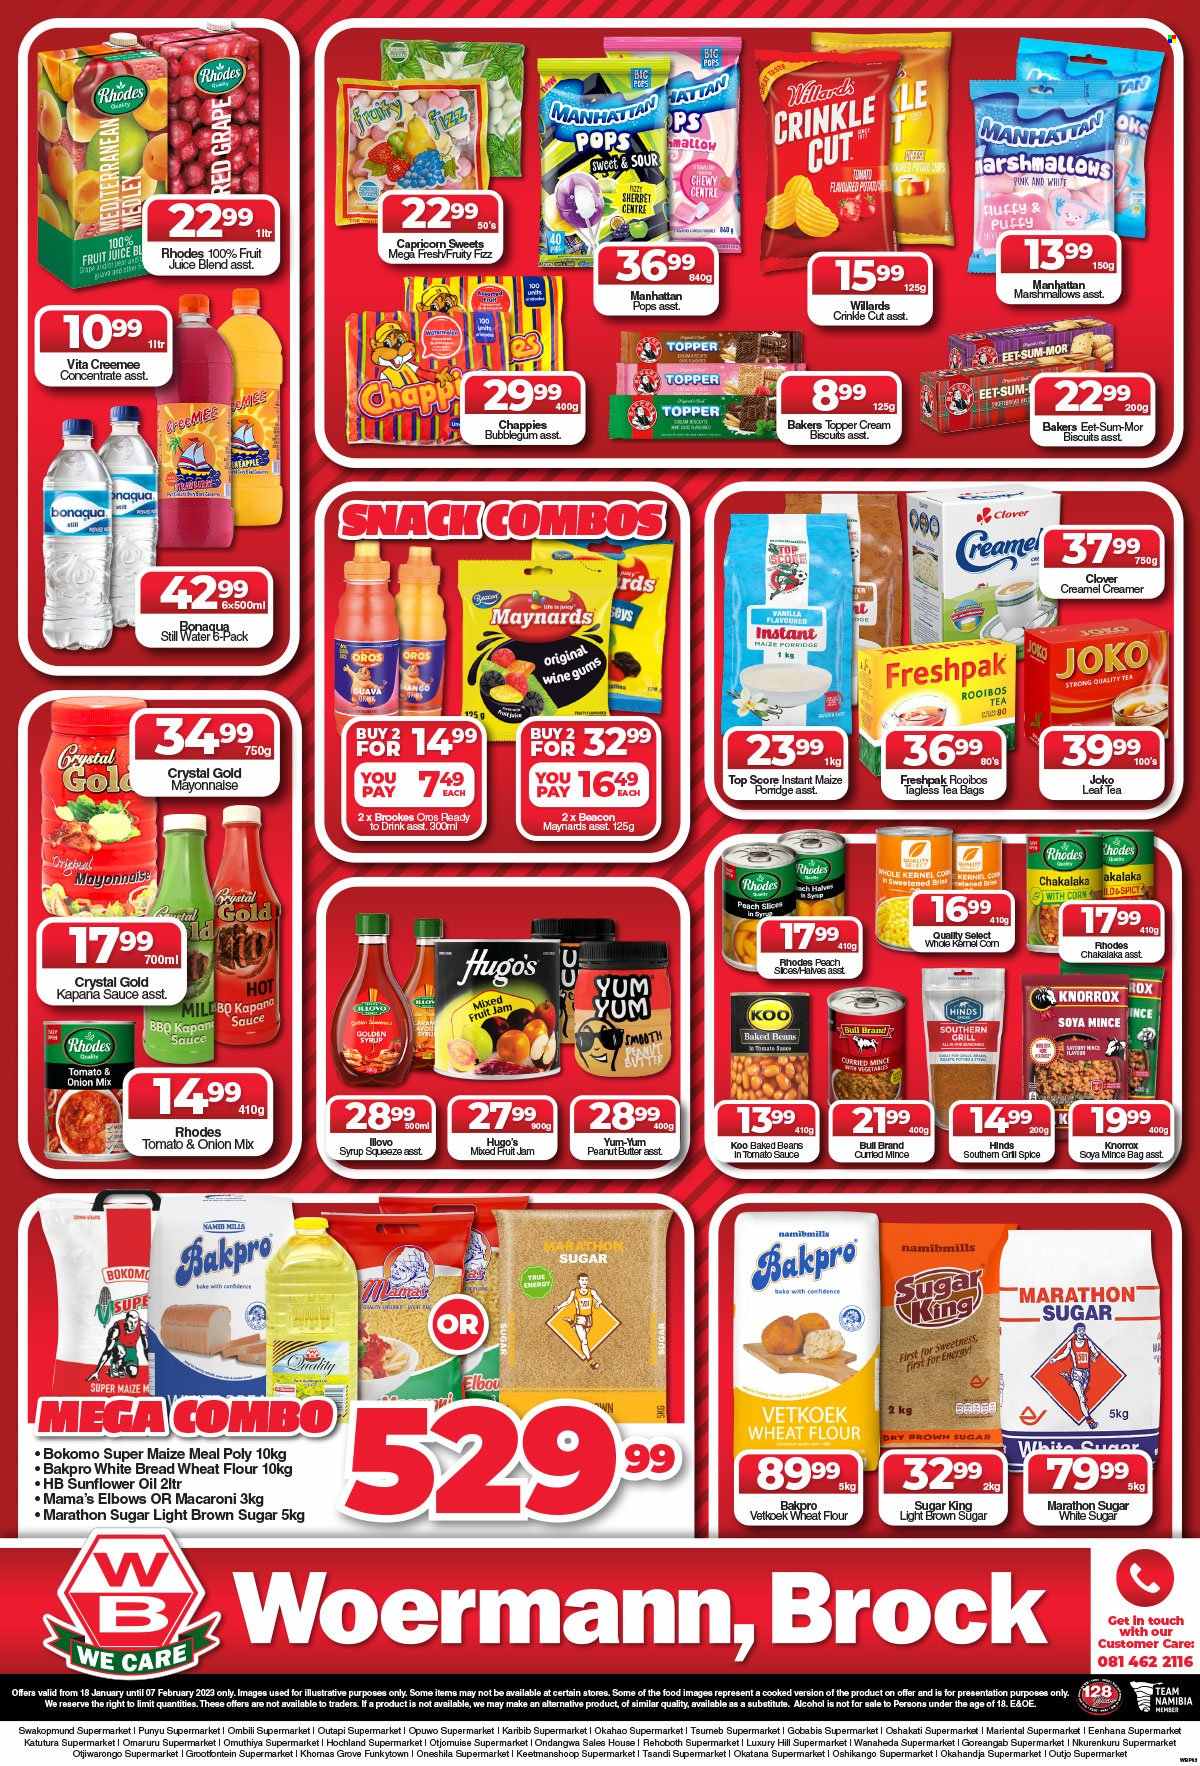 Woermann Brock catalogue  - 18/01/2023 - 07/02/2023 - Sales products - bread, white bread, beans, guava, pears, macaroni, chakalaka, Mama's, cheese, Clover, creamer, mayonnaise, sherbet, marshmallows, snack, bubblegum, biscuit, cane sugar, flour, wheat flour, maize meal, soya mince, Knorrox, baked beans, Koo, porridge, spice, Hinds, sunflower oil, oil, jam, peanut butter, syrup, fruit juice, juice, Oros, mineral water, bottled water, Bonaqua, tea bags, rooibos tea, Joko, alcohol, BIC, Bakers. Page 3.